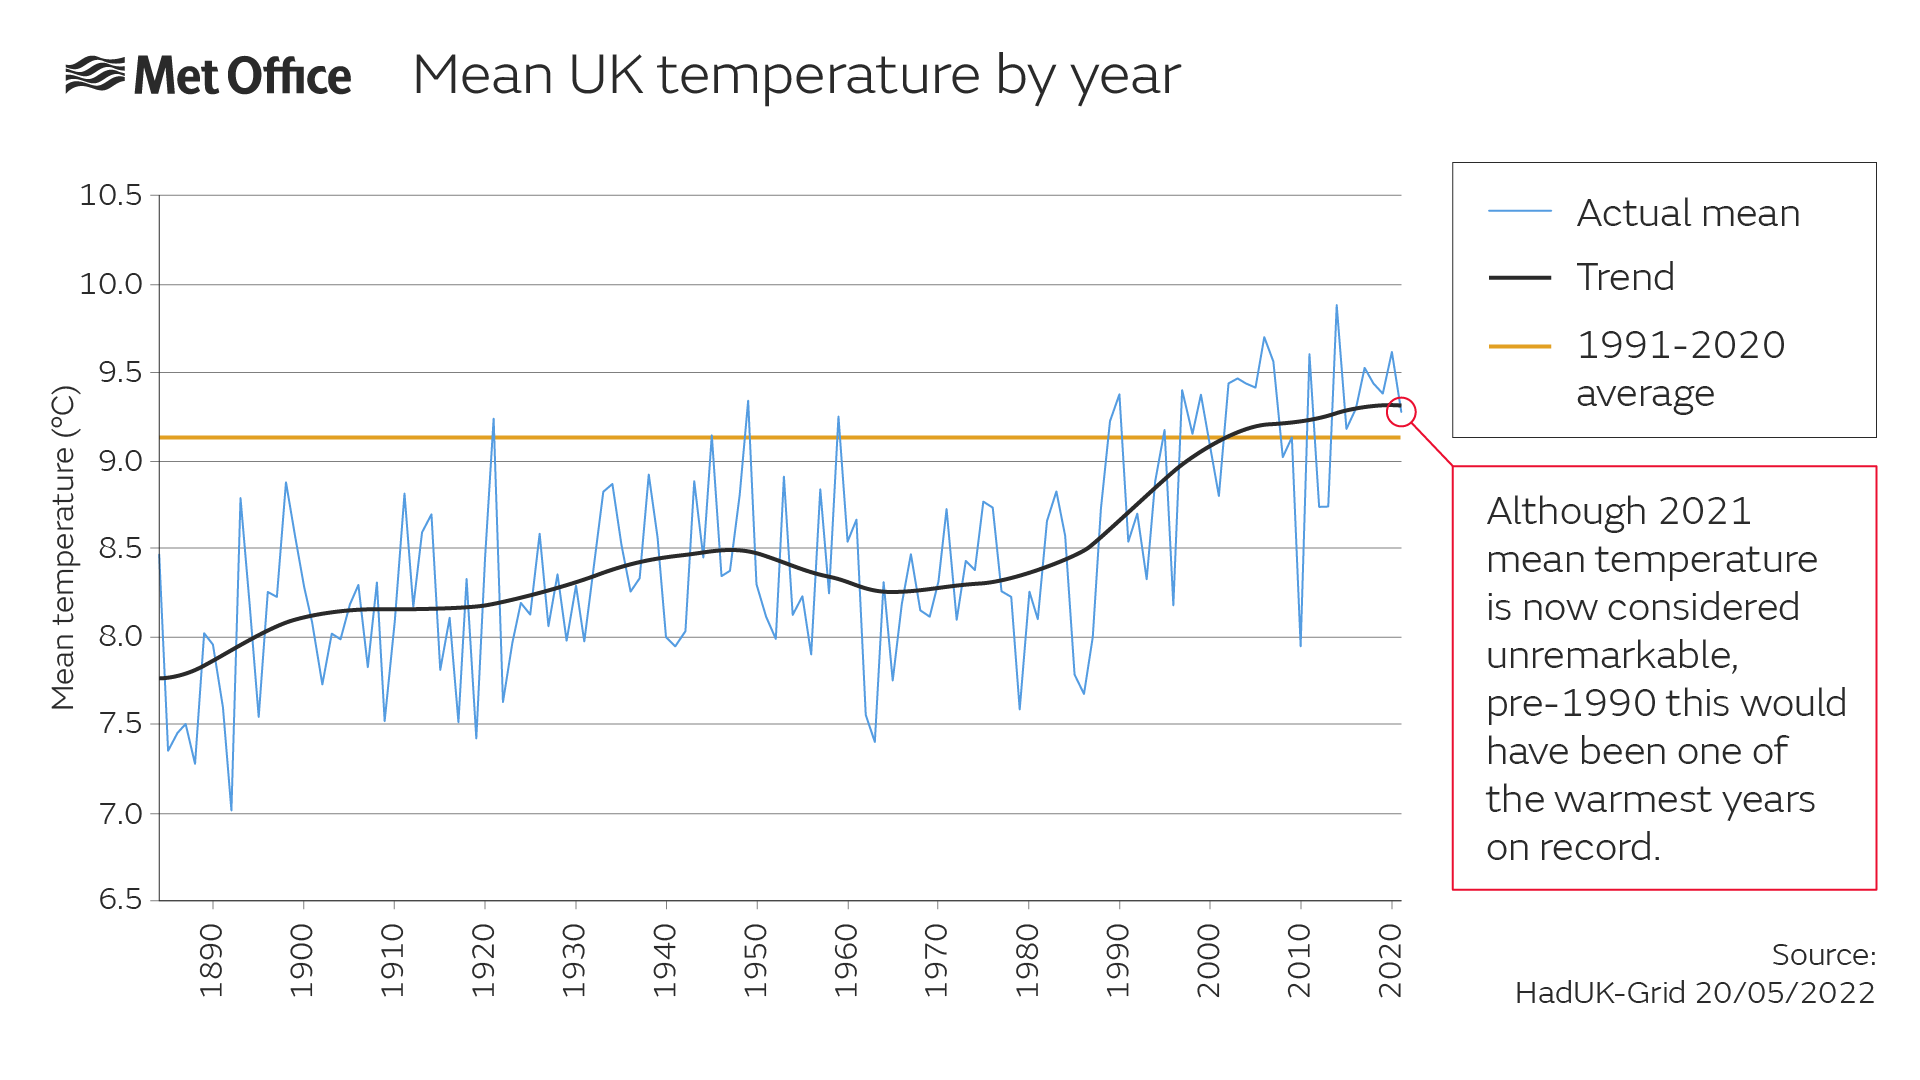 UK mean temperature up to 2021 including 1991-2020 average